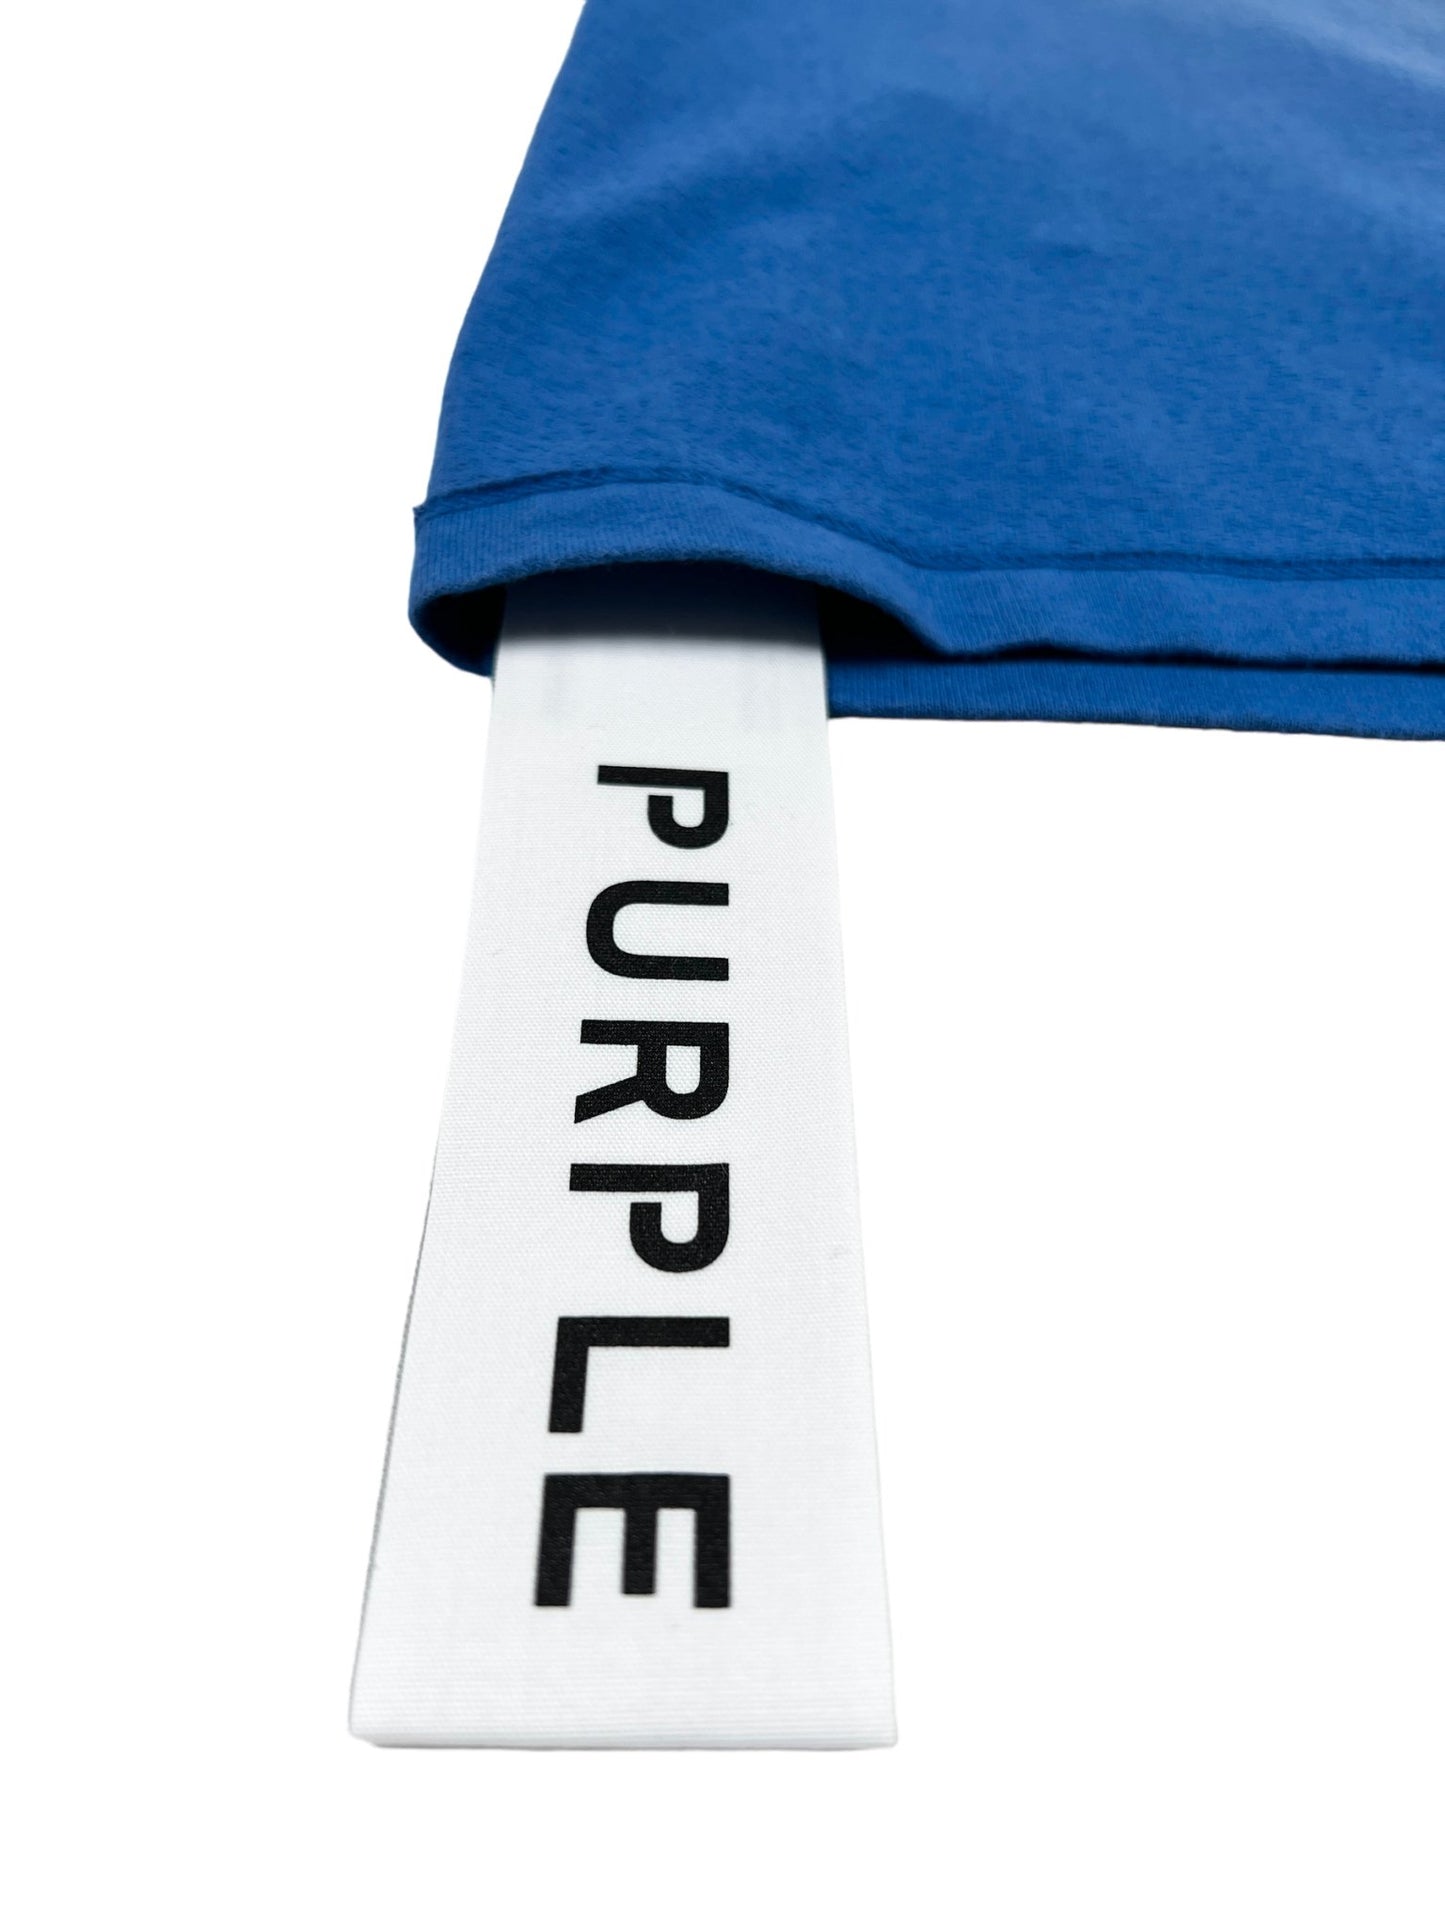 A PURPLE BRAND P101-JUCB TEXTURED INSIDE OUT TEE BLUE with the word "purple" on it.